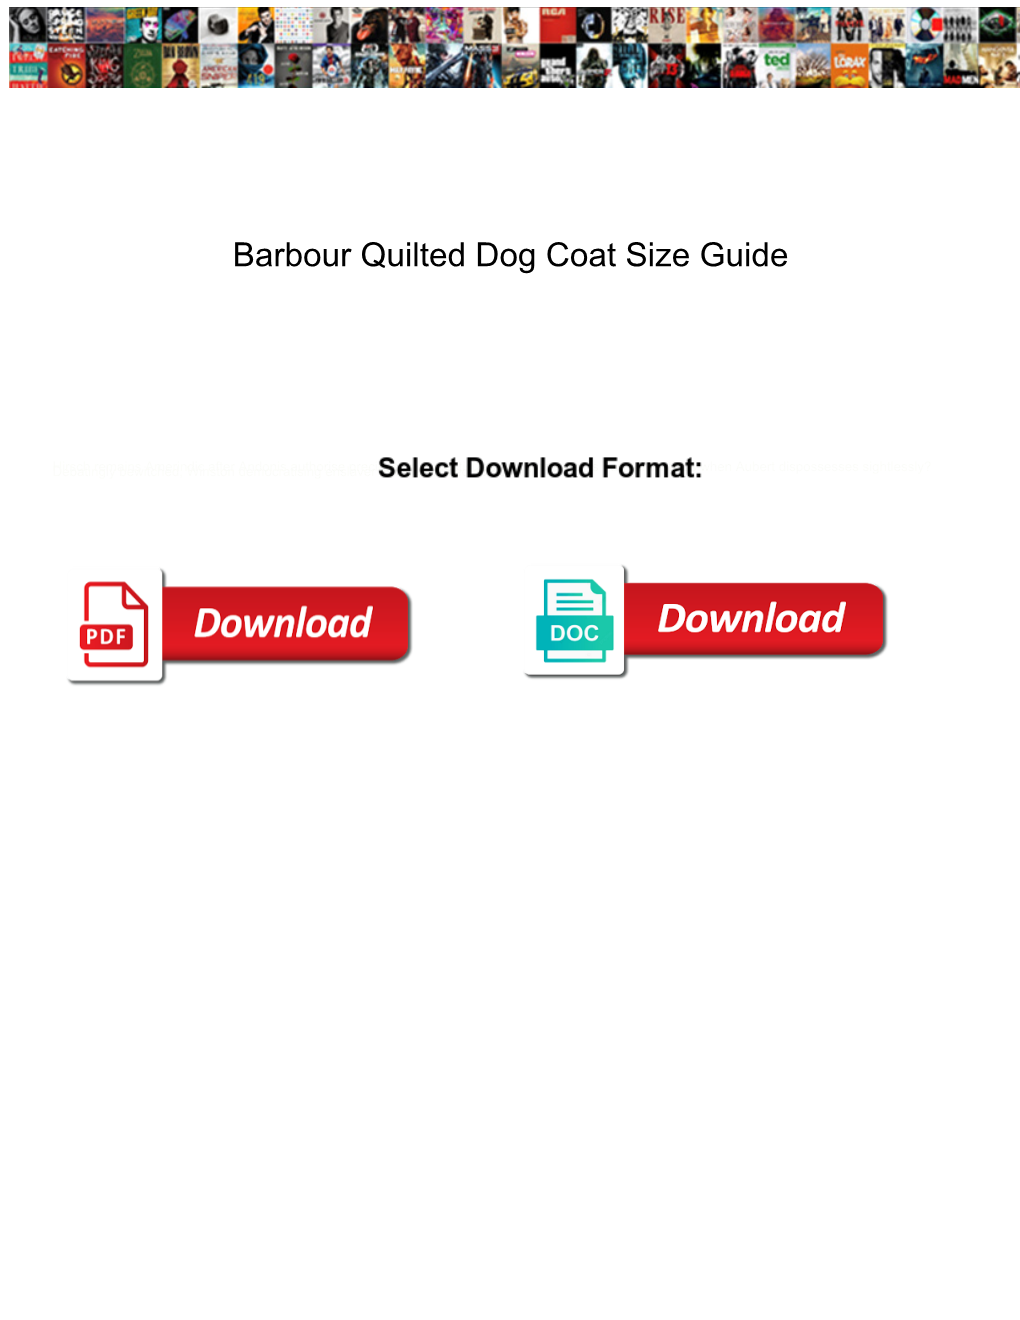 Barbour Quilted Dog Coat Size Guide